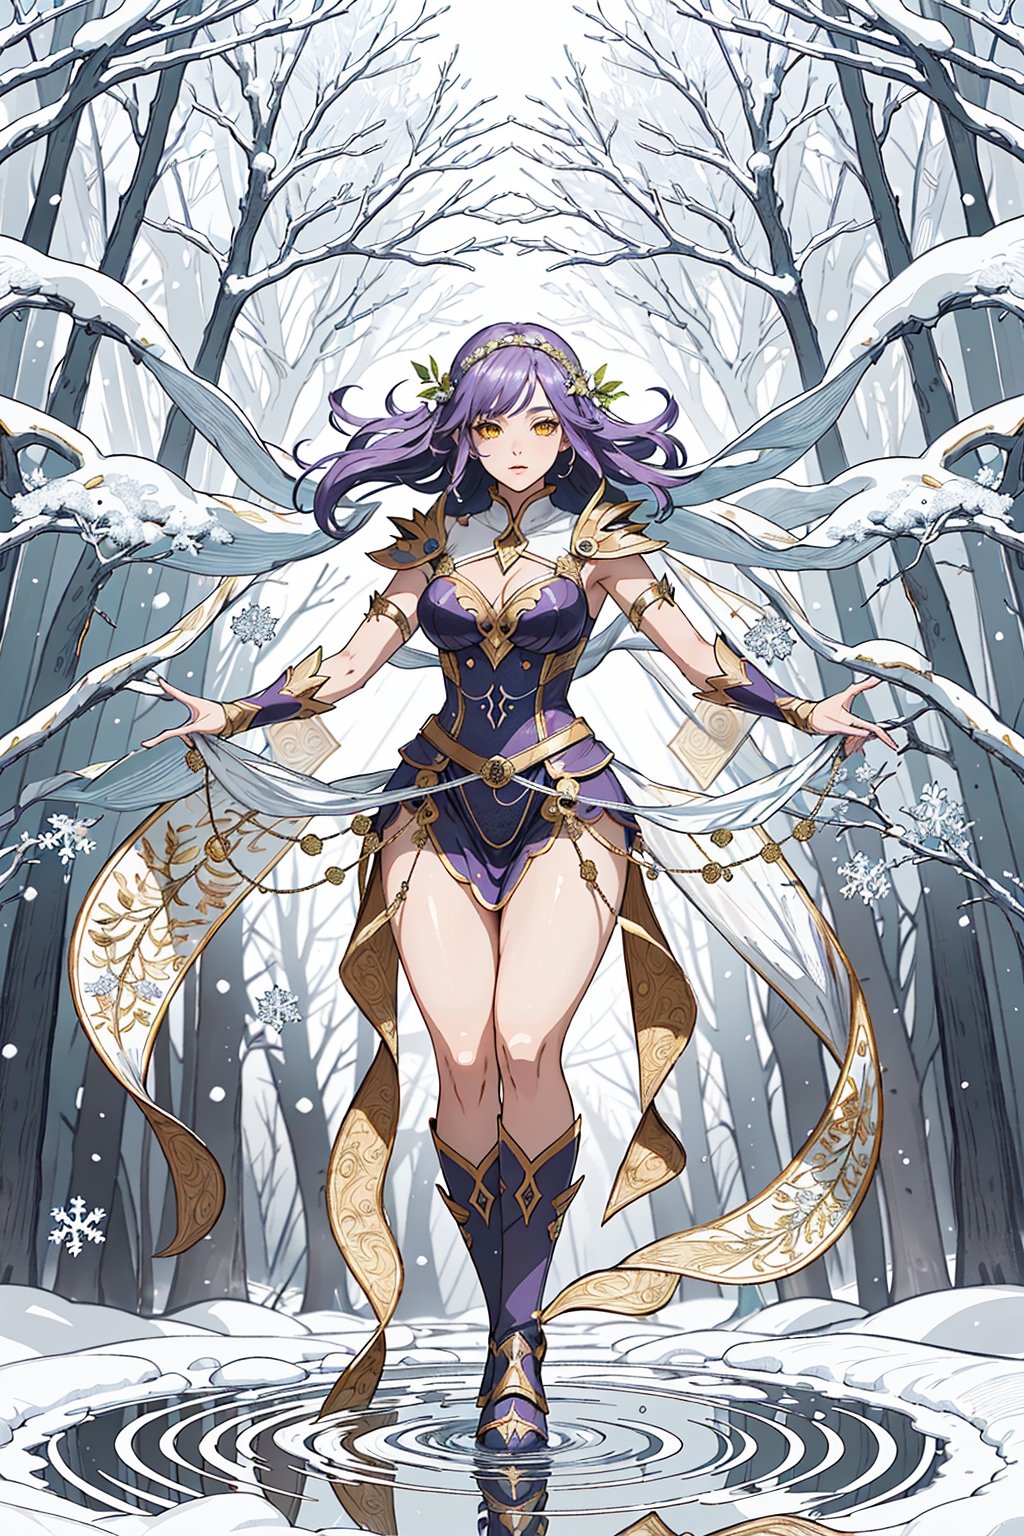 ((Plant armor)),Nature Elf, adorned with luxuriant purple Hair, a vibrant reflection of the enchanting Magic winter scenery that flourish in the Heavenly winter Forest. Captivating Yellow Eyes mirror the wisdom and radiance of celestial flora, while Ivory Skin carries the purity of divine realms. The elf's Curvy Body embodies the organic elegance found in this ethereal winter forest, where each step reverberates with the magical pulse of nature. Envision this Nature Elf approaches you, reaching out to you, her presence enhancing their otherworldly glow. The background, a resplendent Heavenly winter Forest bathed in soft, celestial light, reflected from the snow captures the ethereal beauty of a realm where nature and magic intertwine seamlessly. This Nature Elf thrives in the embrace of the heavenly groves, where the symphony of celestial breezes,falling snowflakes, creates a haven of enchantment and divine beauty.,More Detail,ARISTYLE4, ,highres,line anime